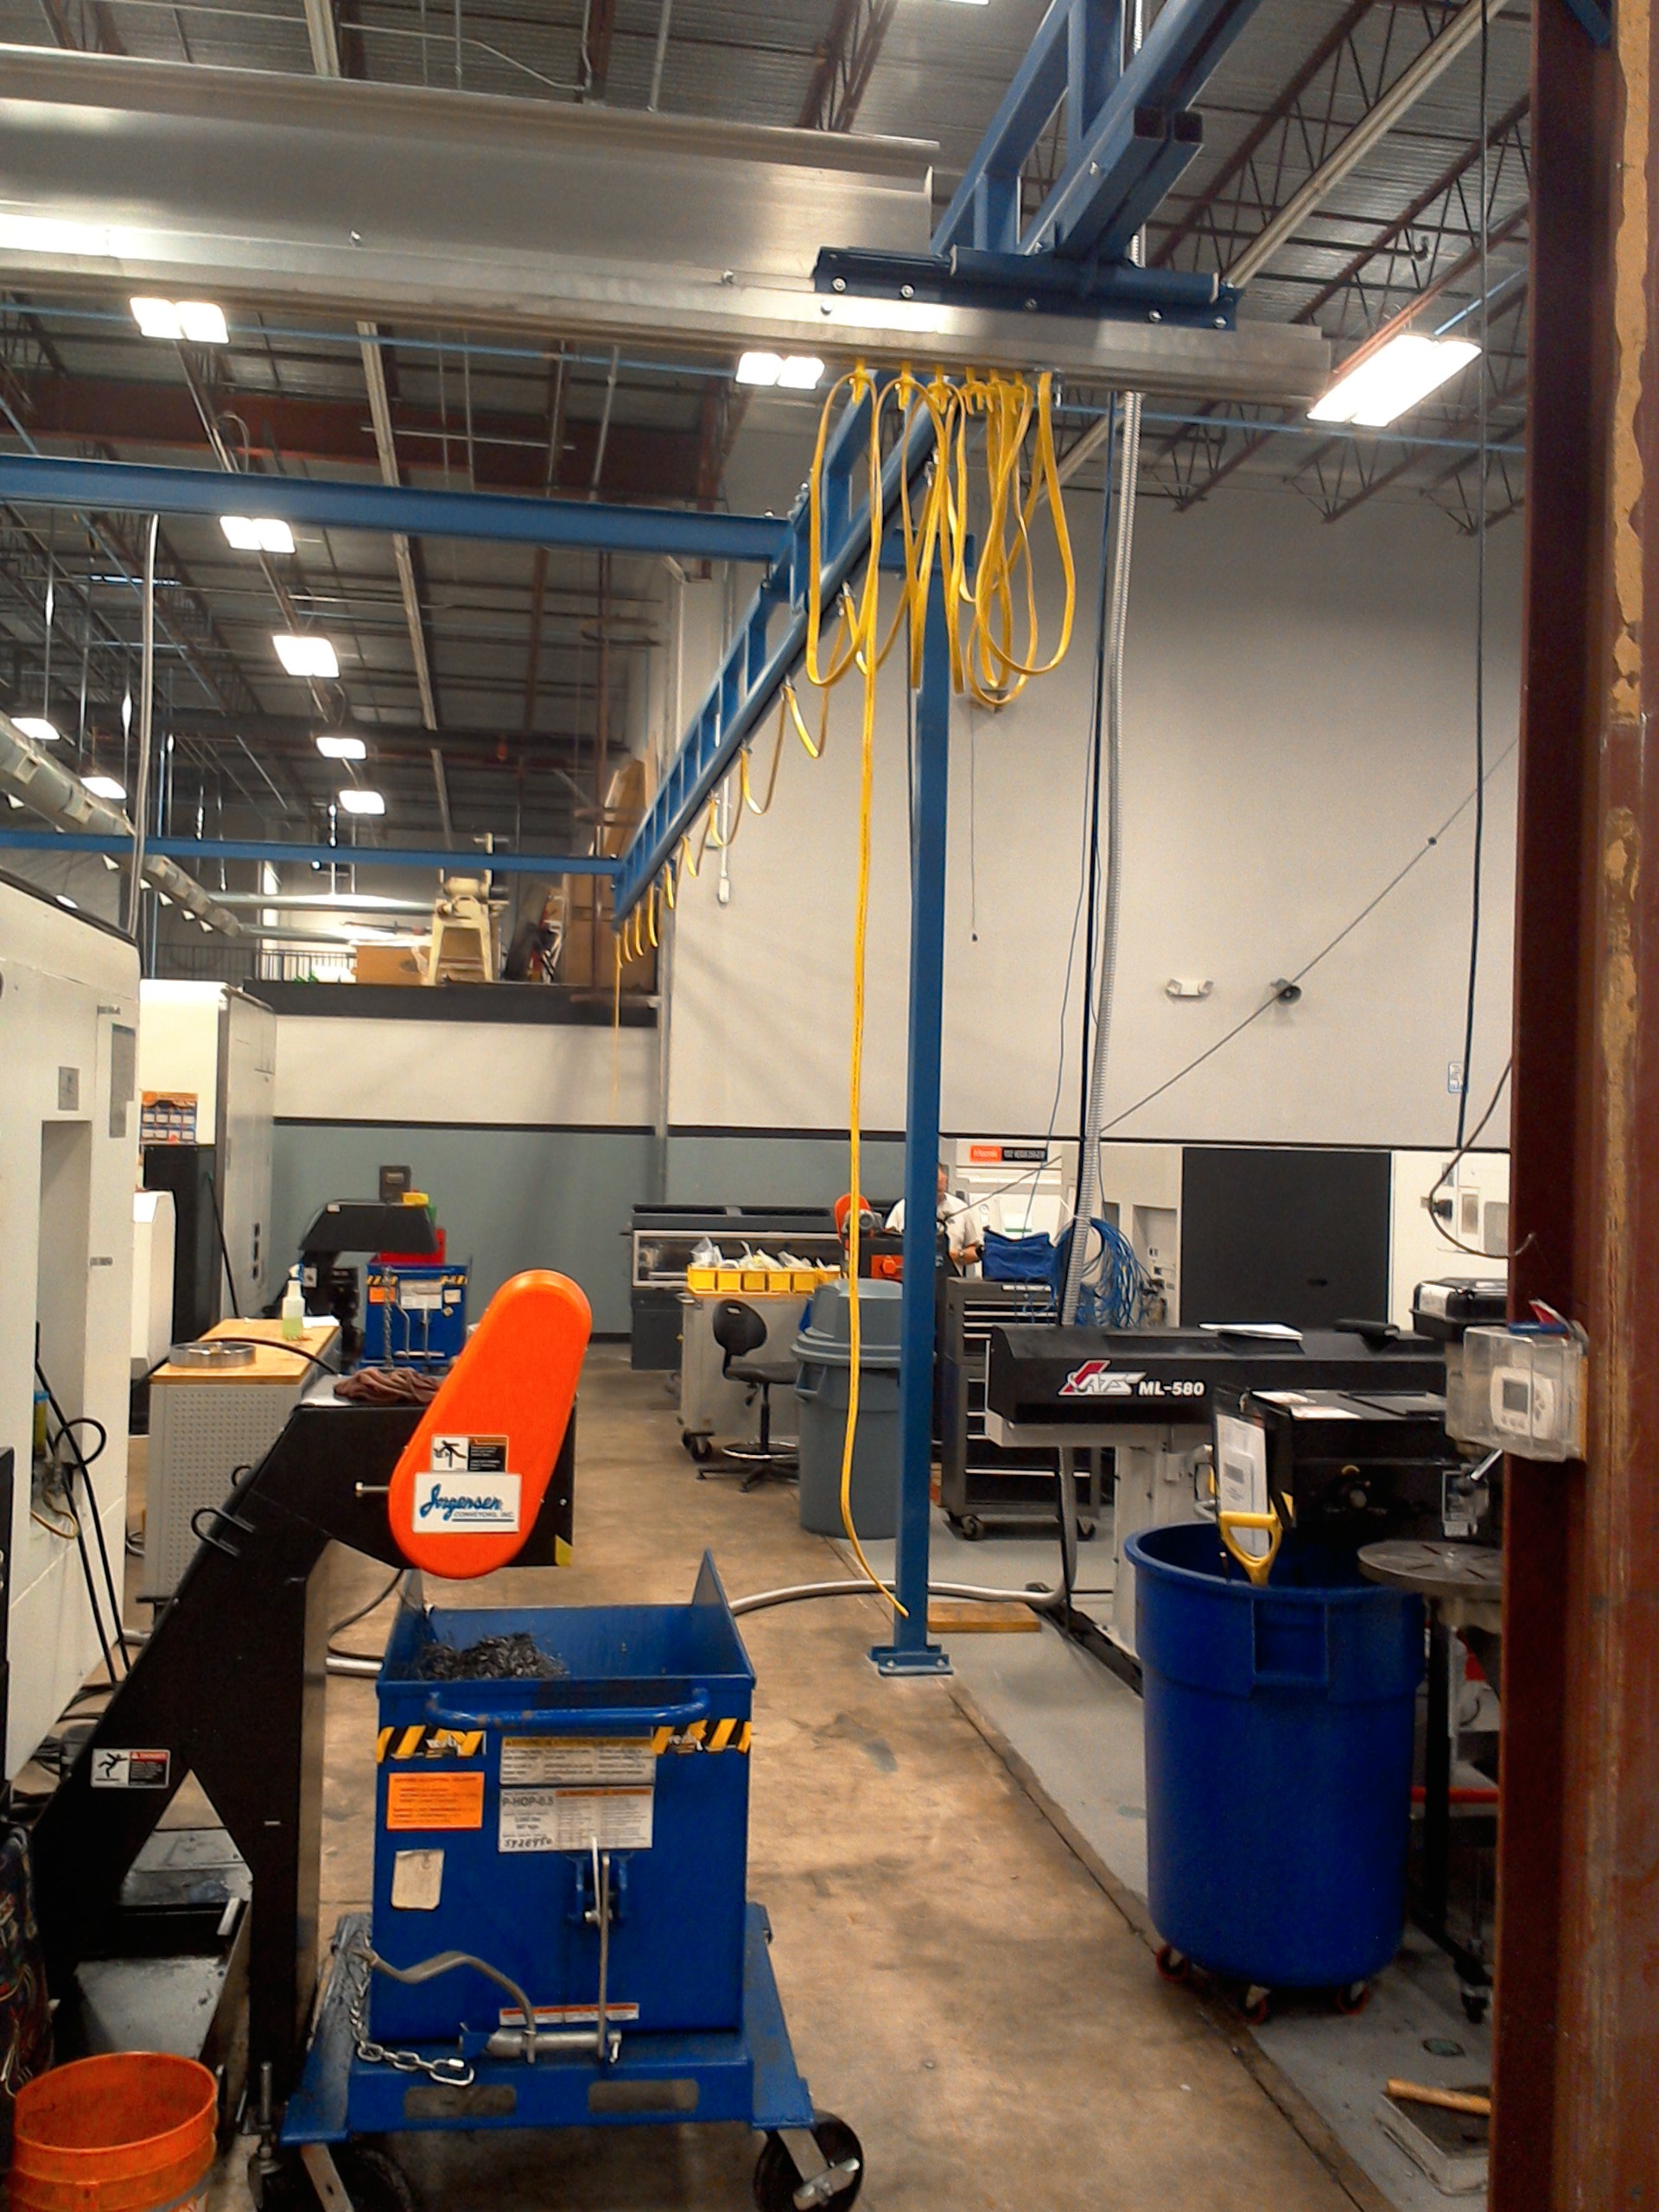 Completed Crane Installation in Dallas TX for Energy Oilfield Service Machine Shop Supplier